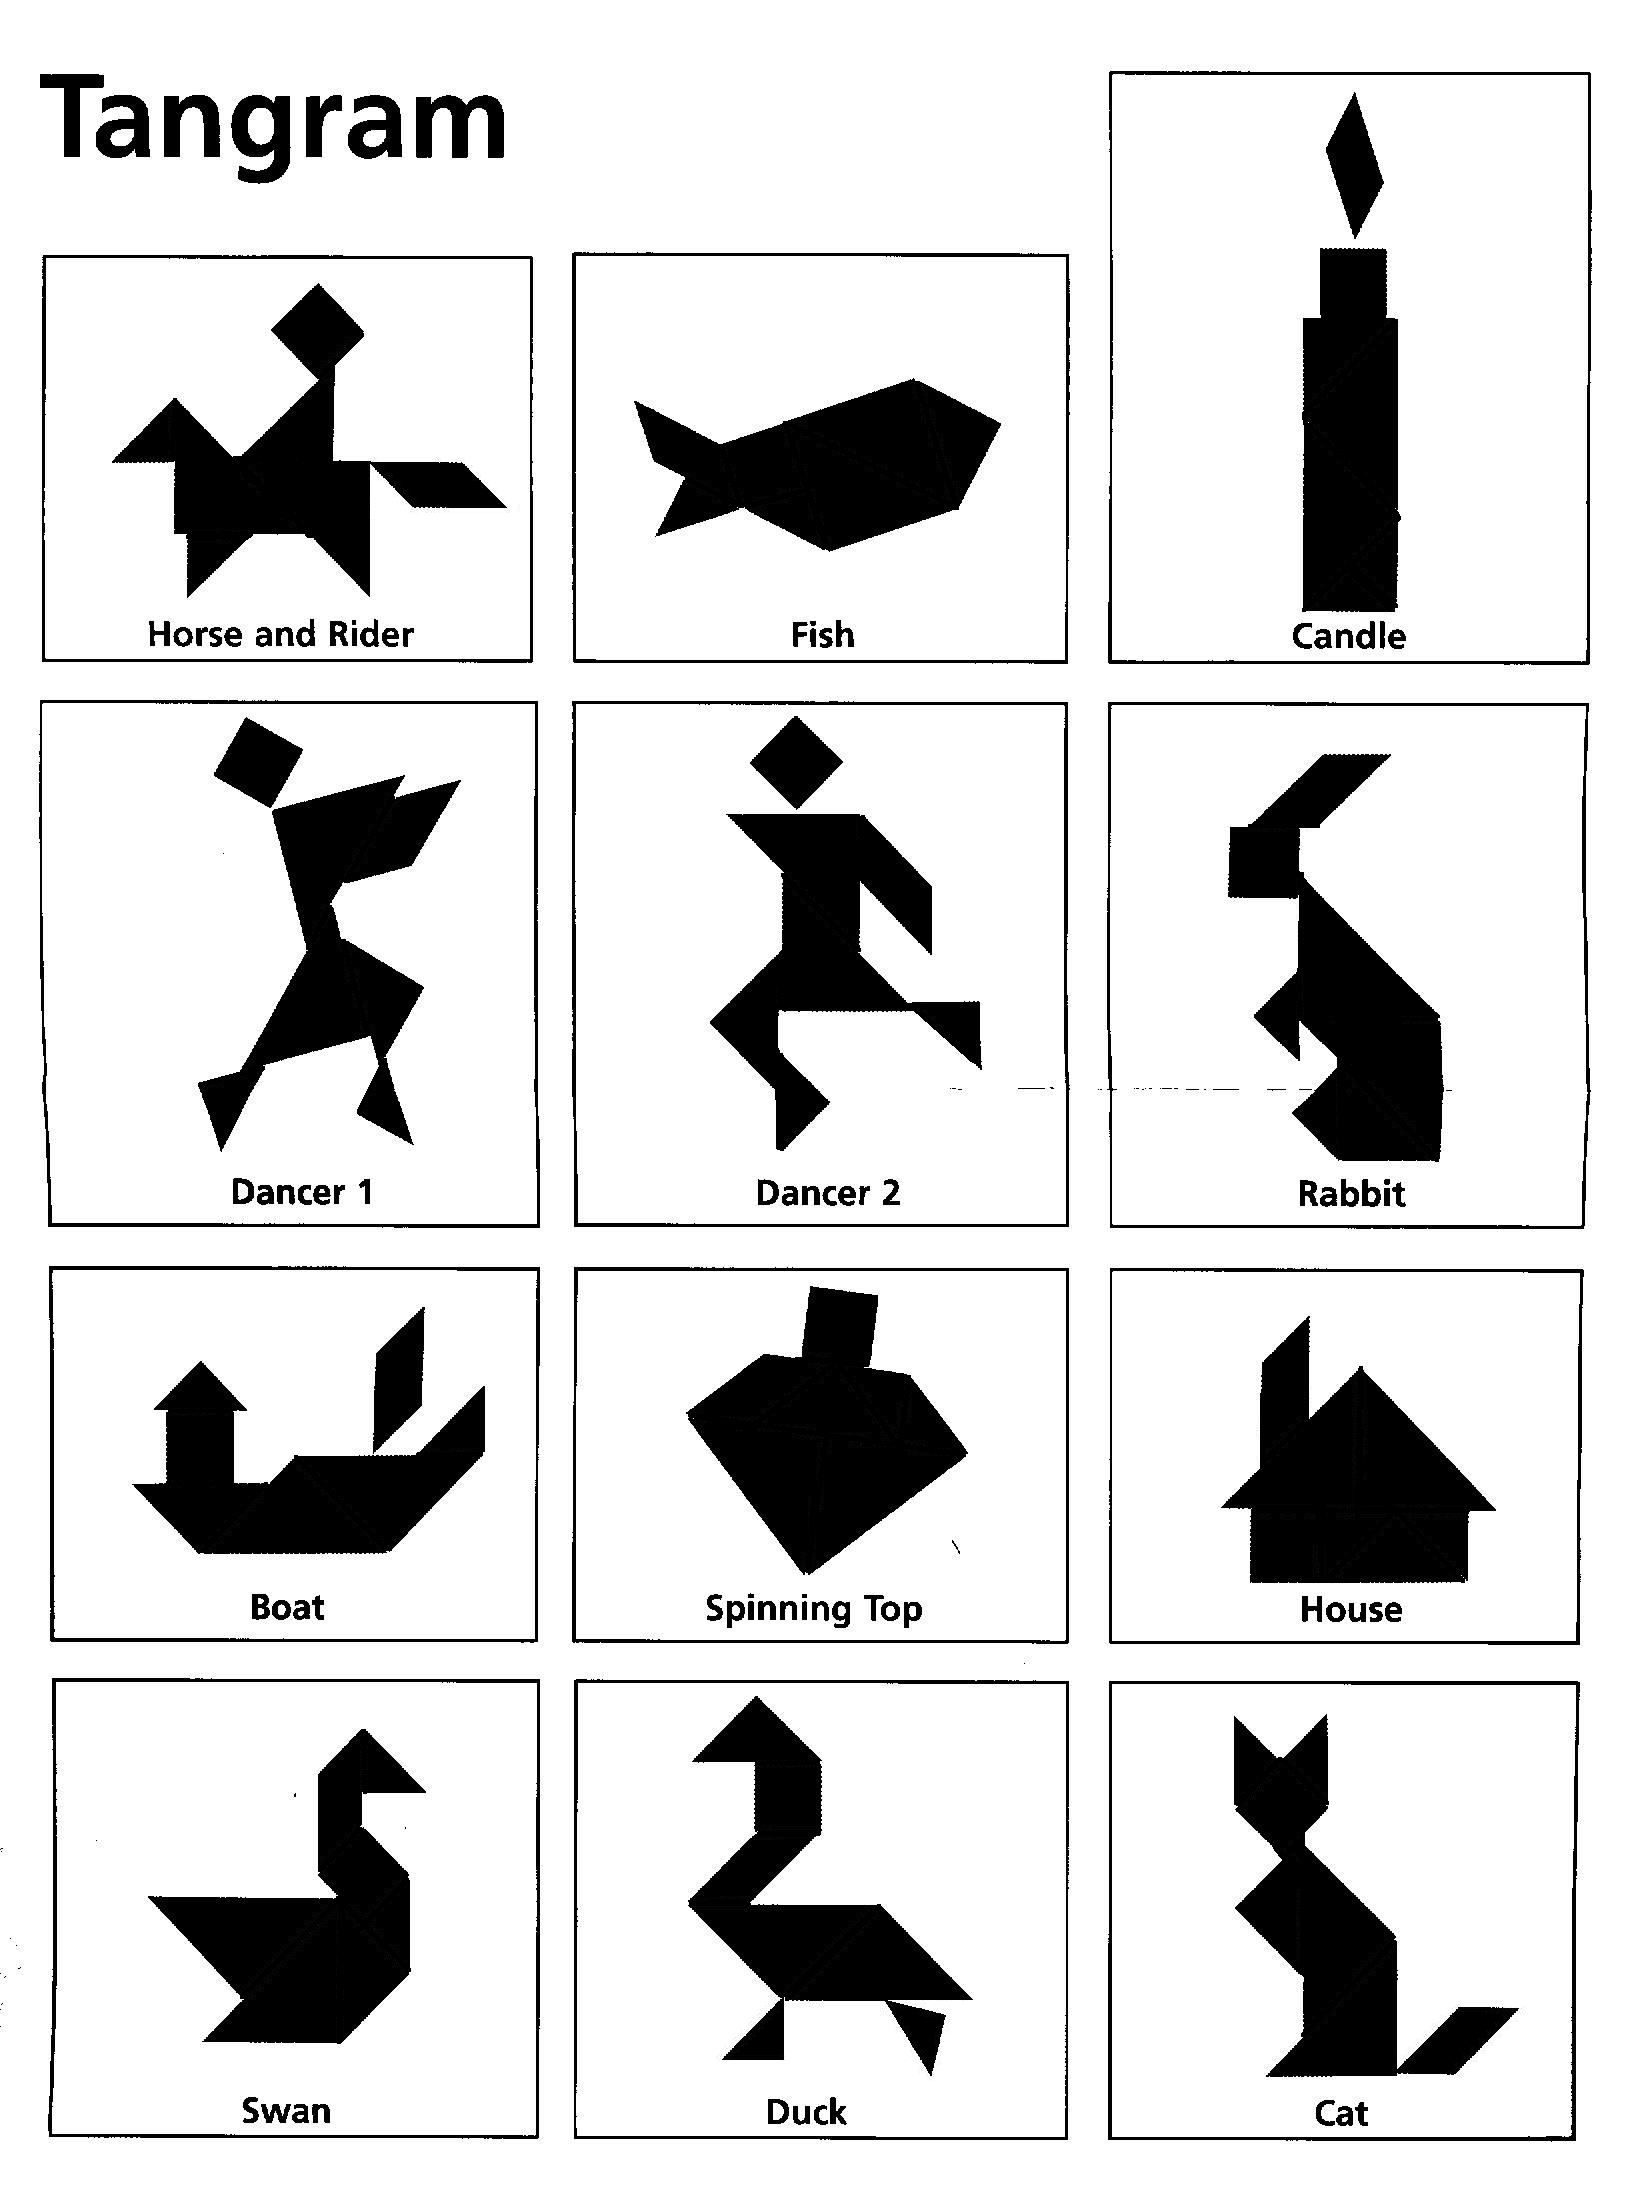 Tangram Outline Solutions Png &amp;amp; Free Tangram Outline Solutions - Printable Tangram Puzzles And Solutions